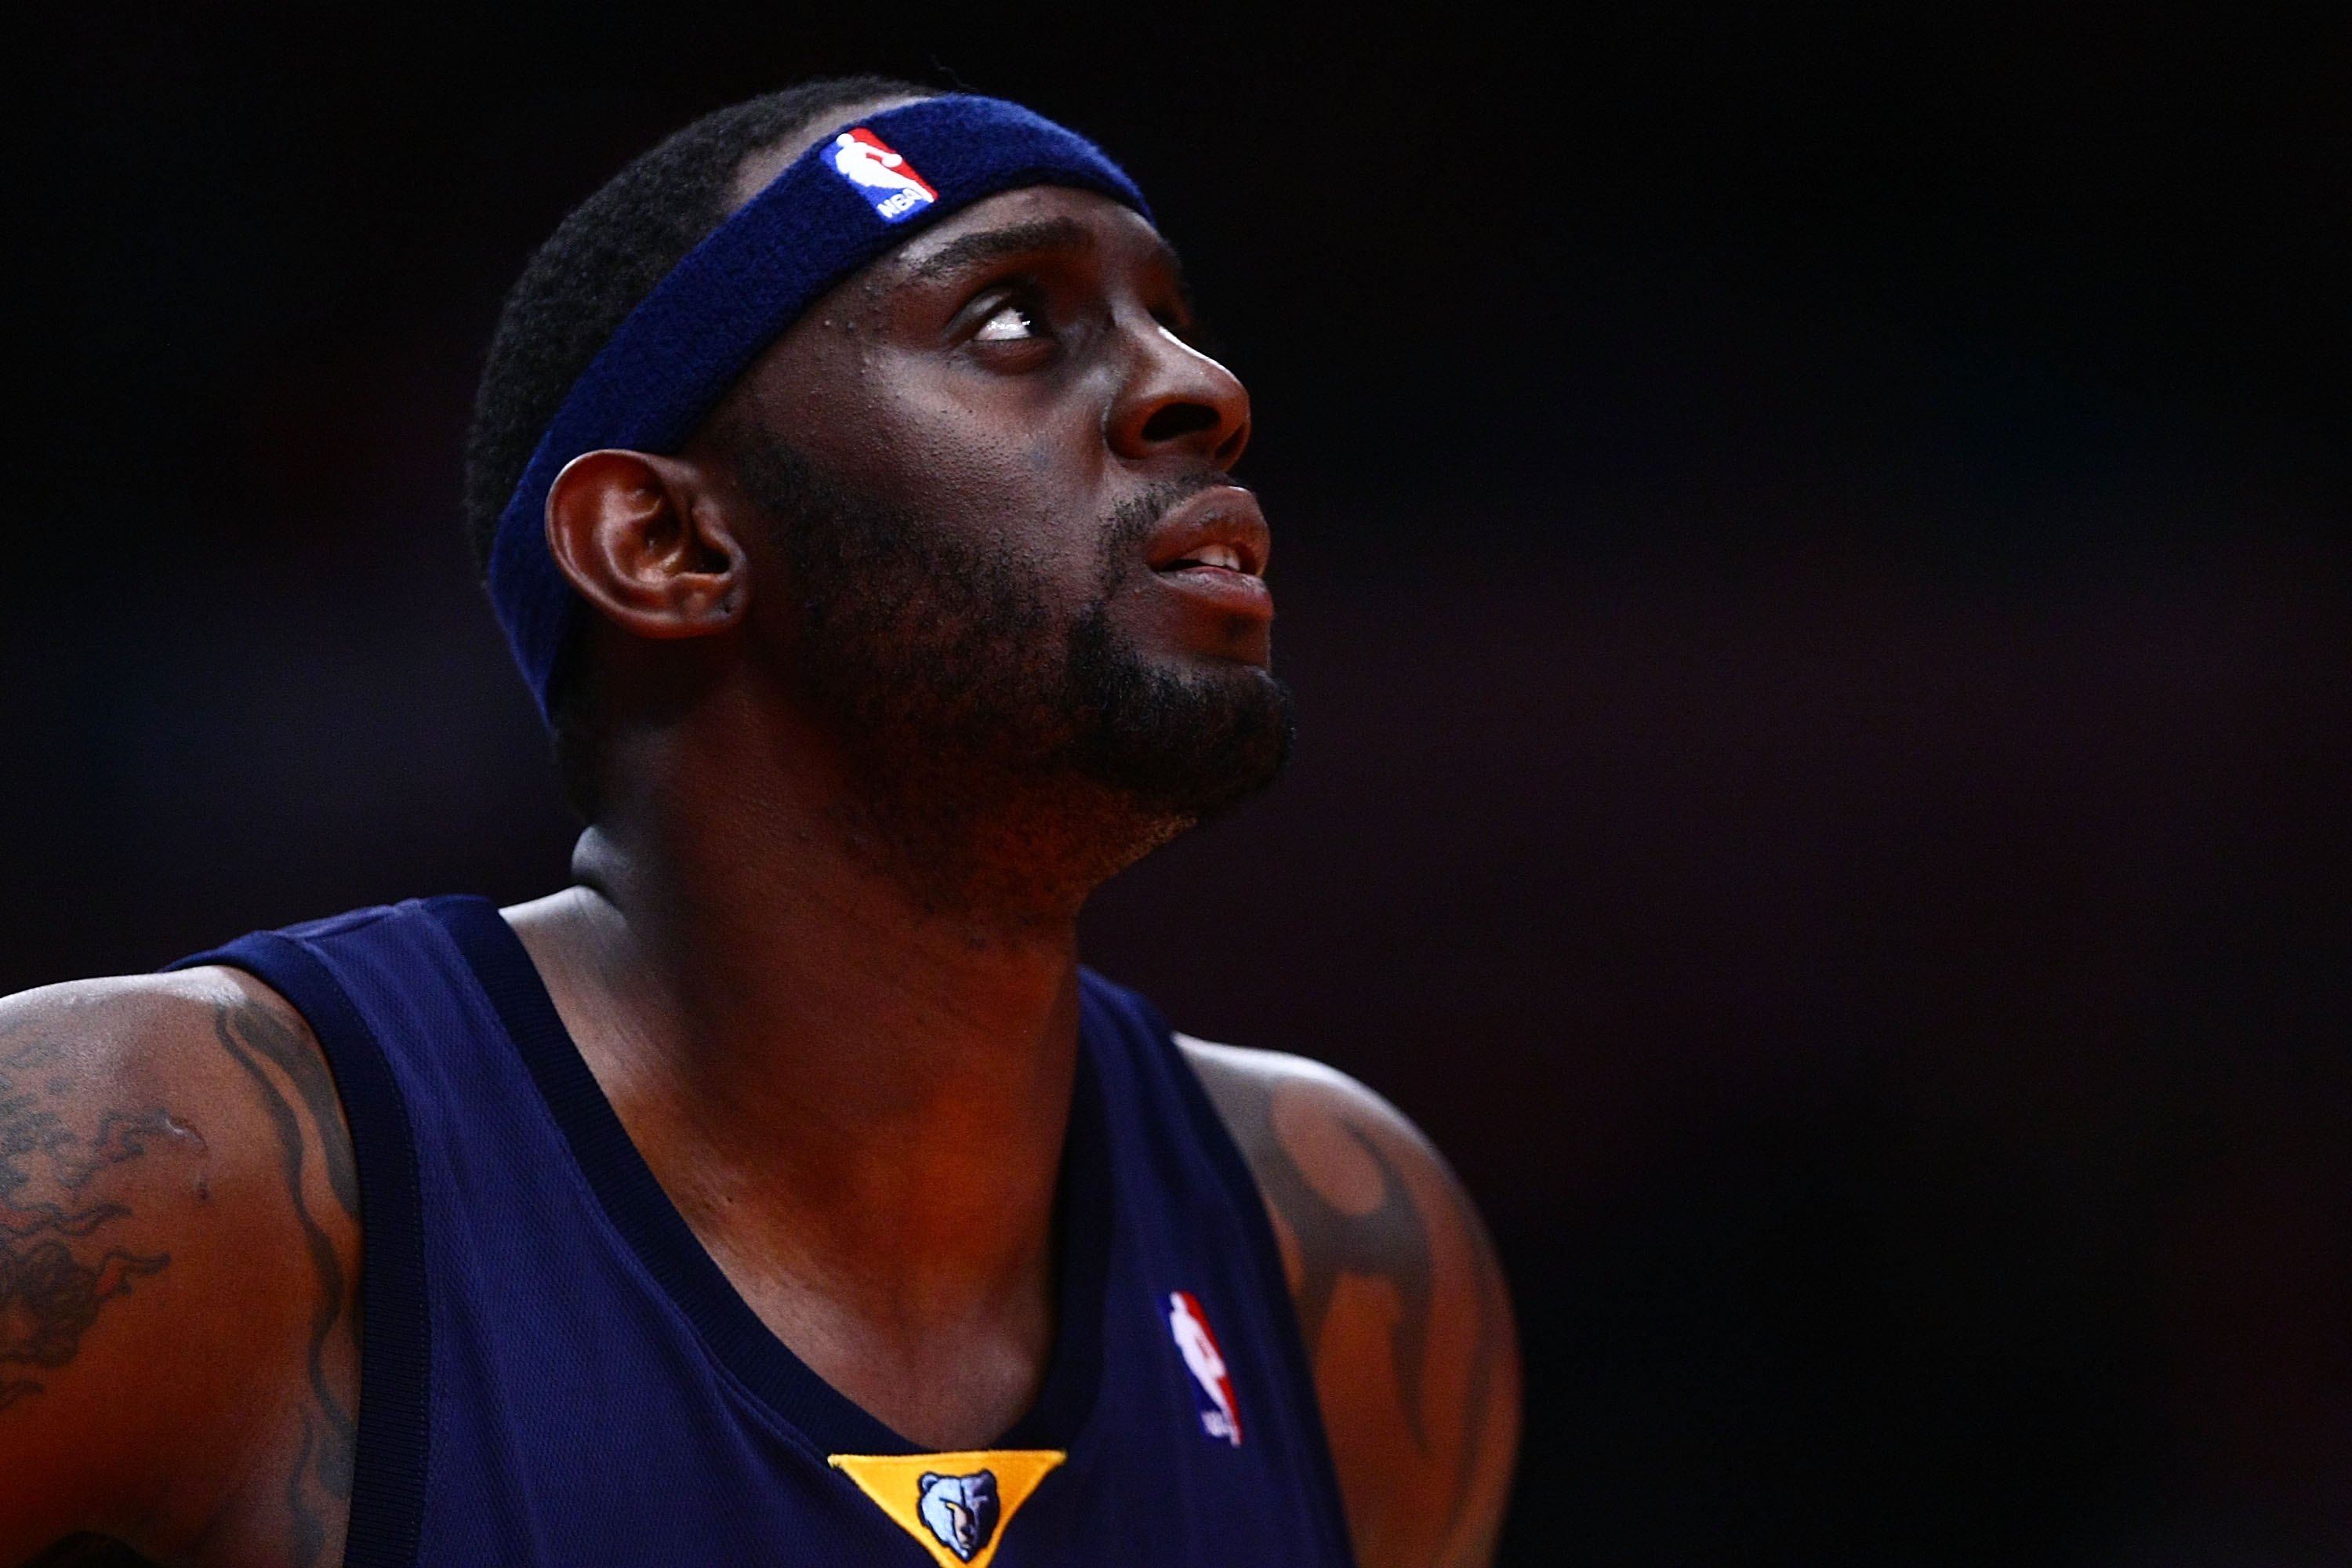 NEW YORK - JANUARY 23:  Darius Miles #3 of the Memphis Grizzlies looks on during the game against the New York Knicks at Madison Square Garden January 23, 2009 in New York City. NOTE TO USER: User expressly acknowledges and agrees that, by downloading and